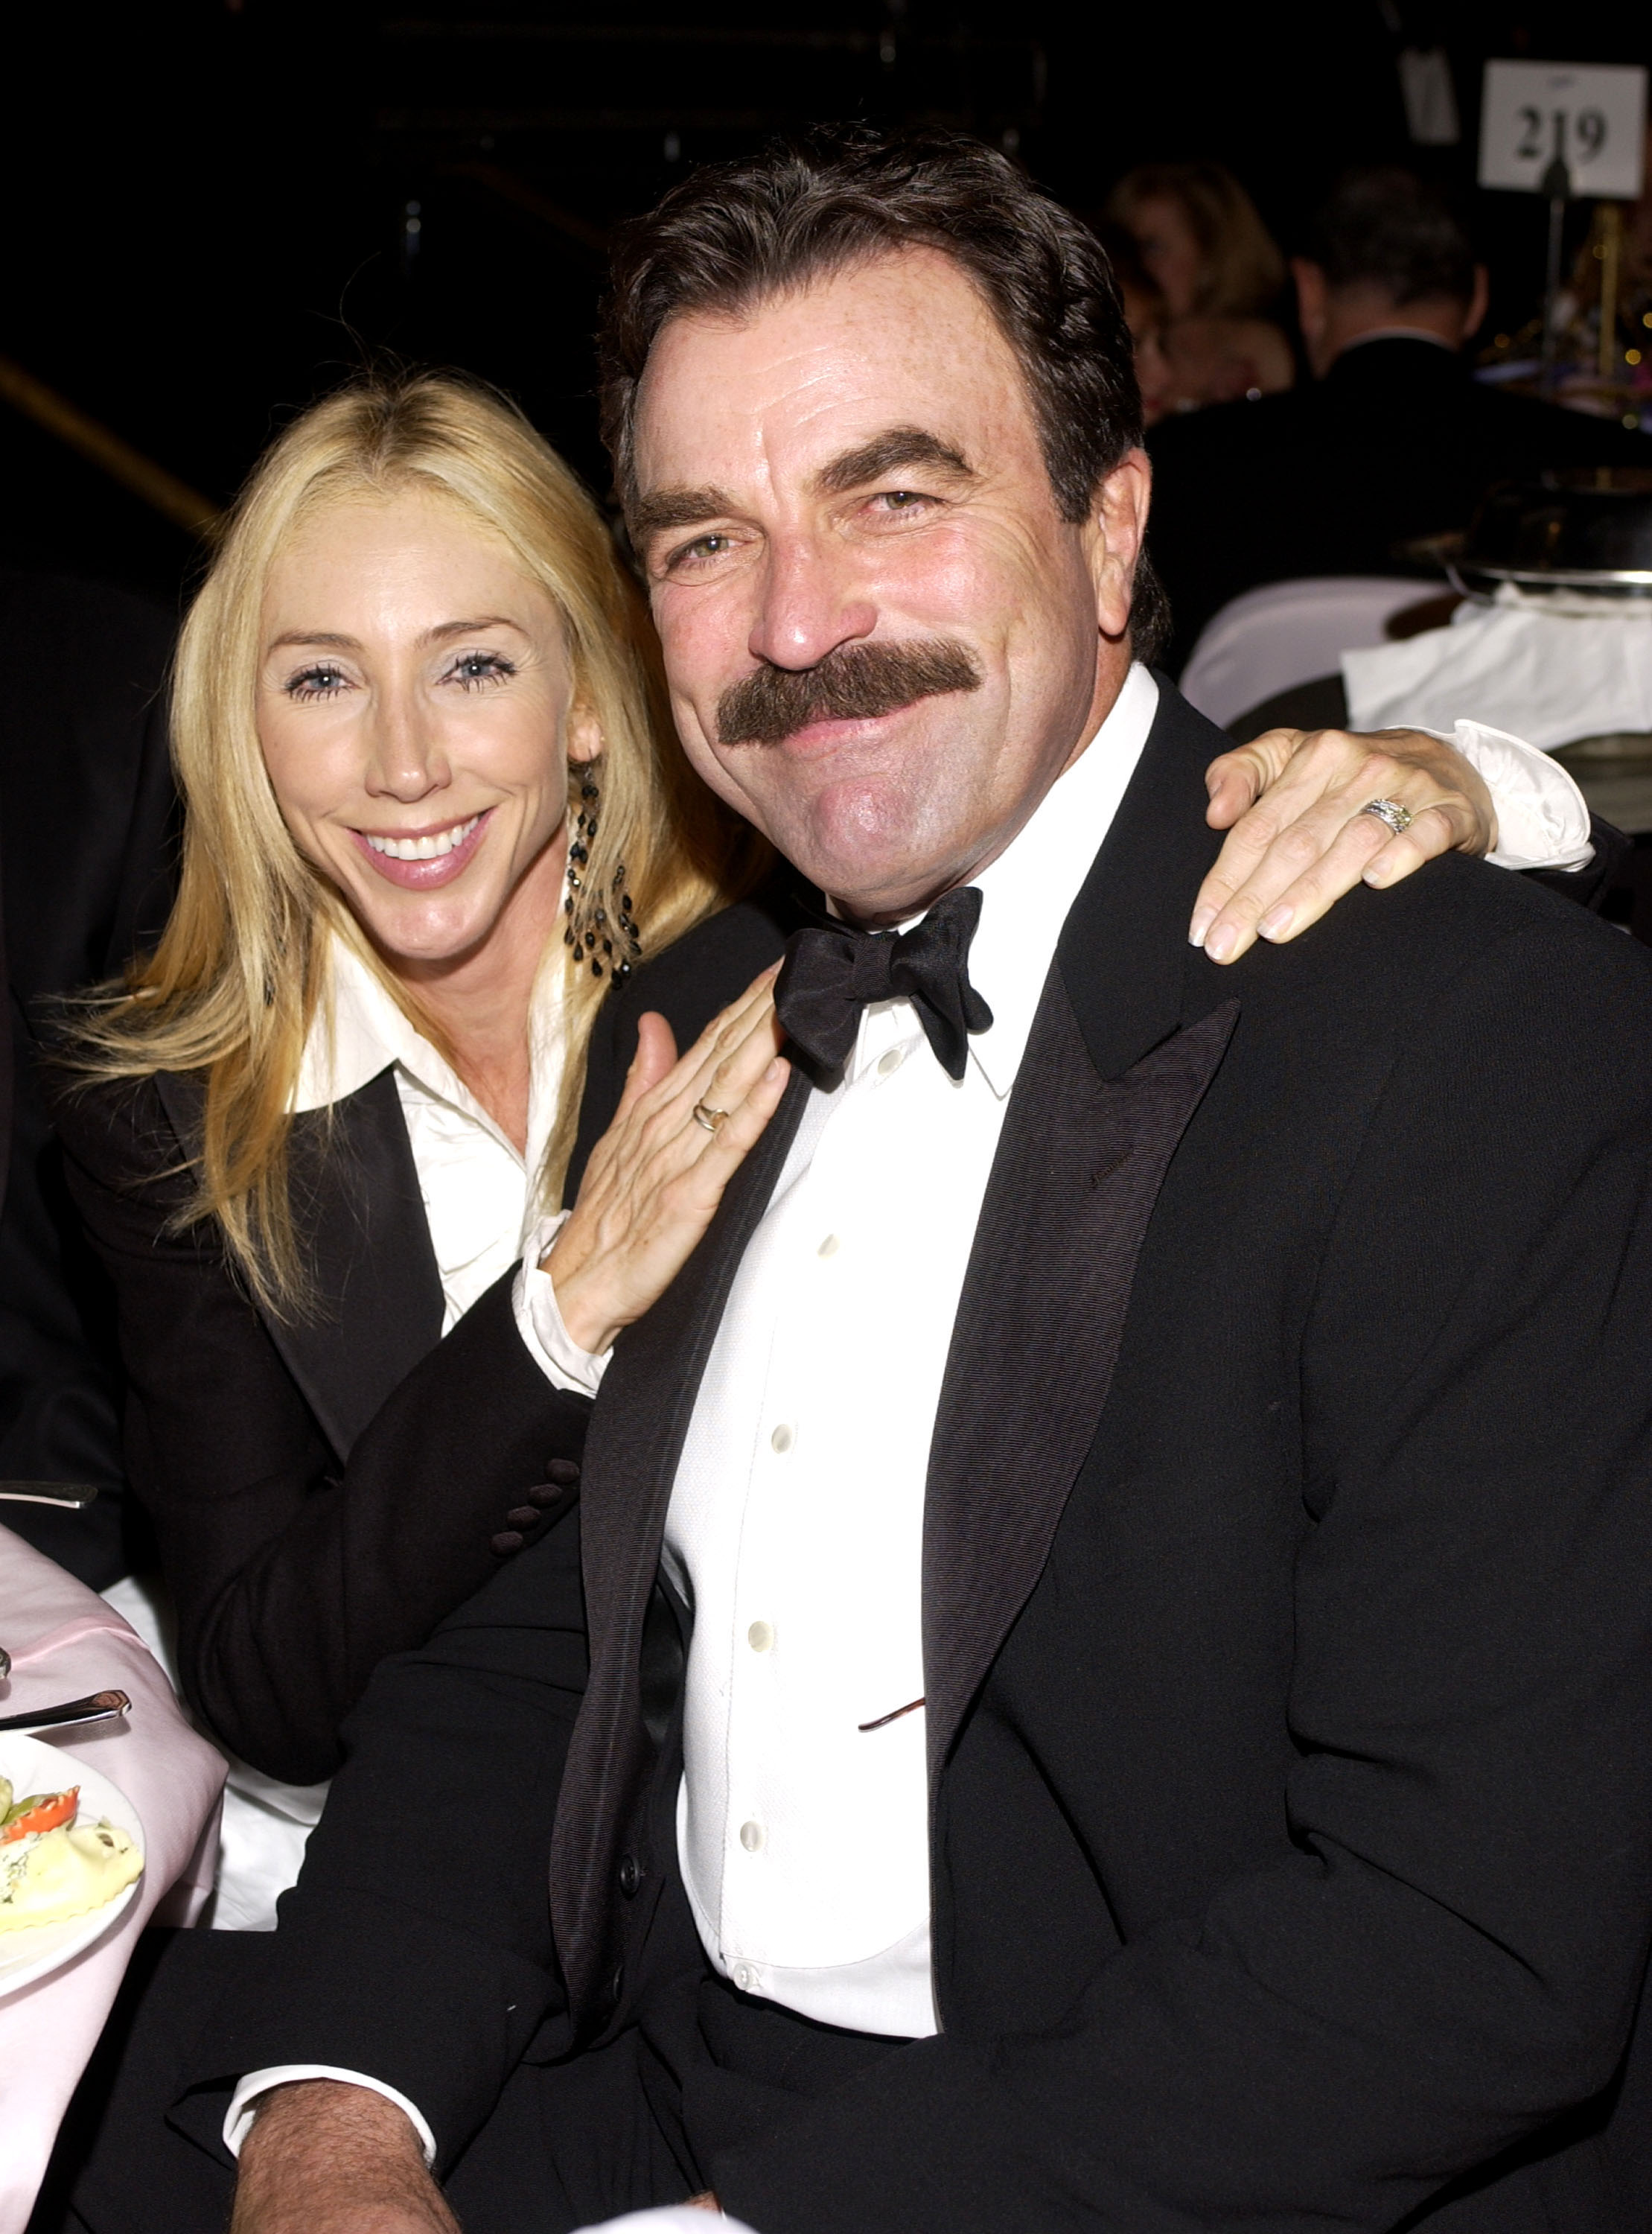 Tom Selleck and Jillie Mack at The 15th Carousel Of Hope Ball - Show and Audience on October 15, 2002. | Source: Getty Images